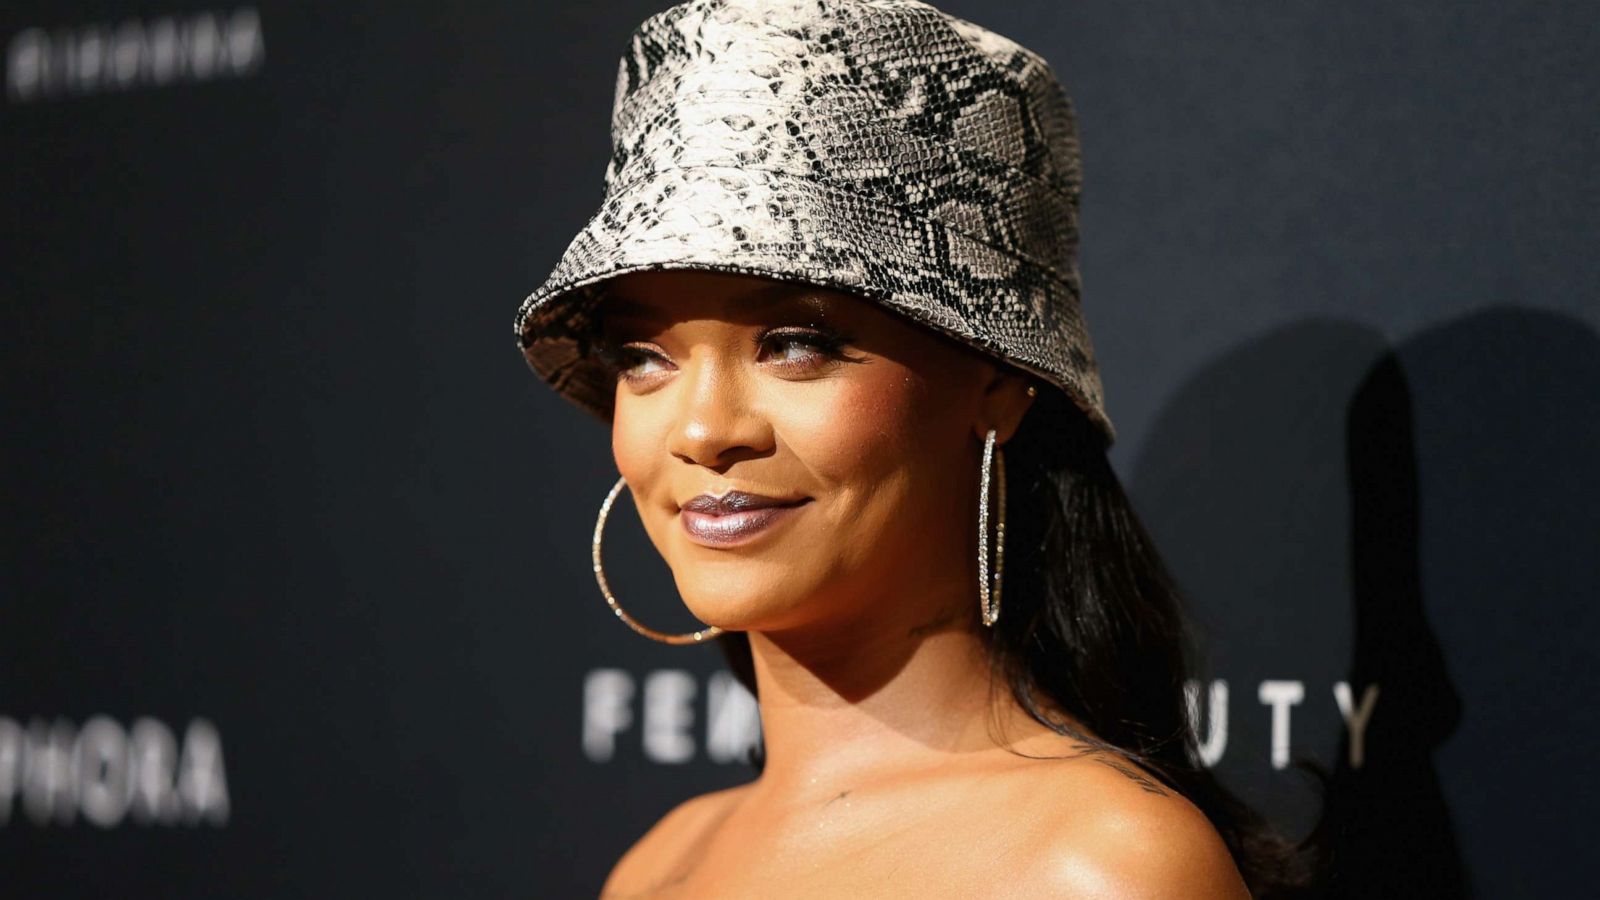 What The LVMH-Rihanna Partnership Means For The Luxury Market